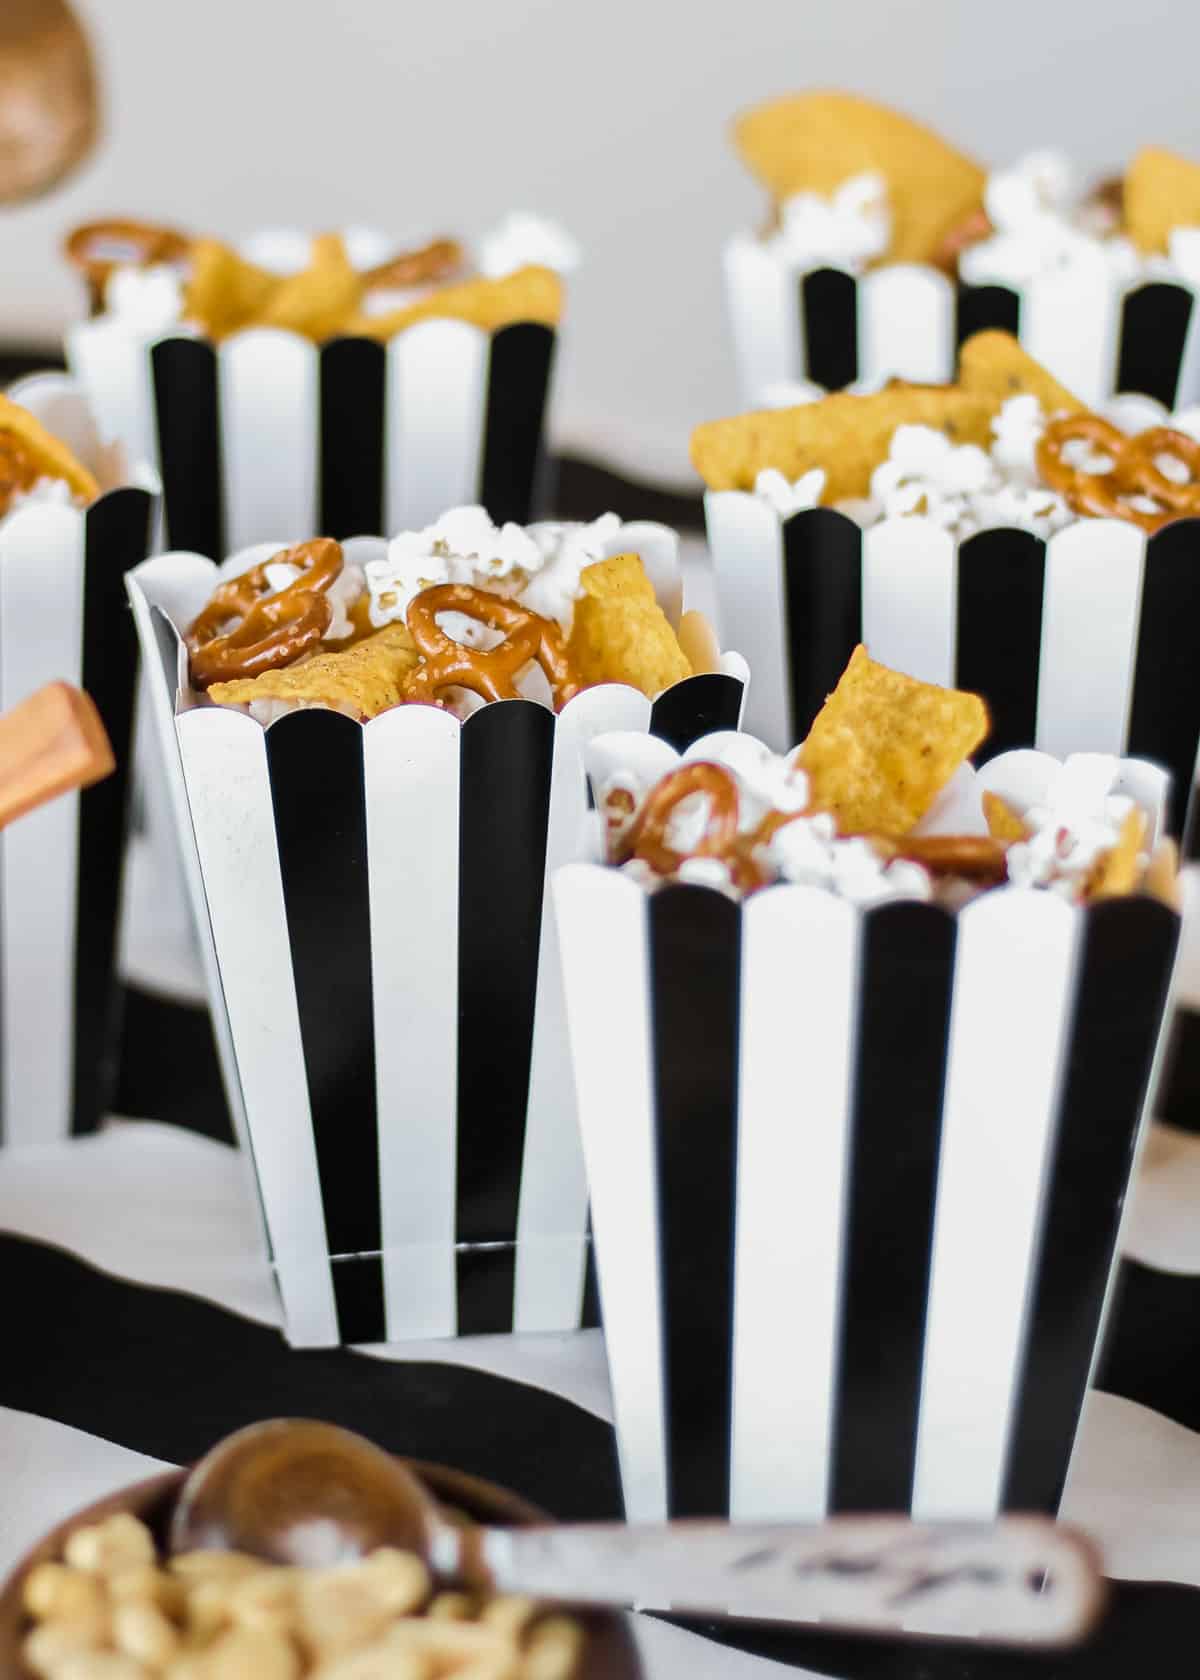 black and white stripe snack boxes filled with popcorn, pretzels, and Doritos.